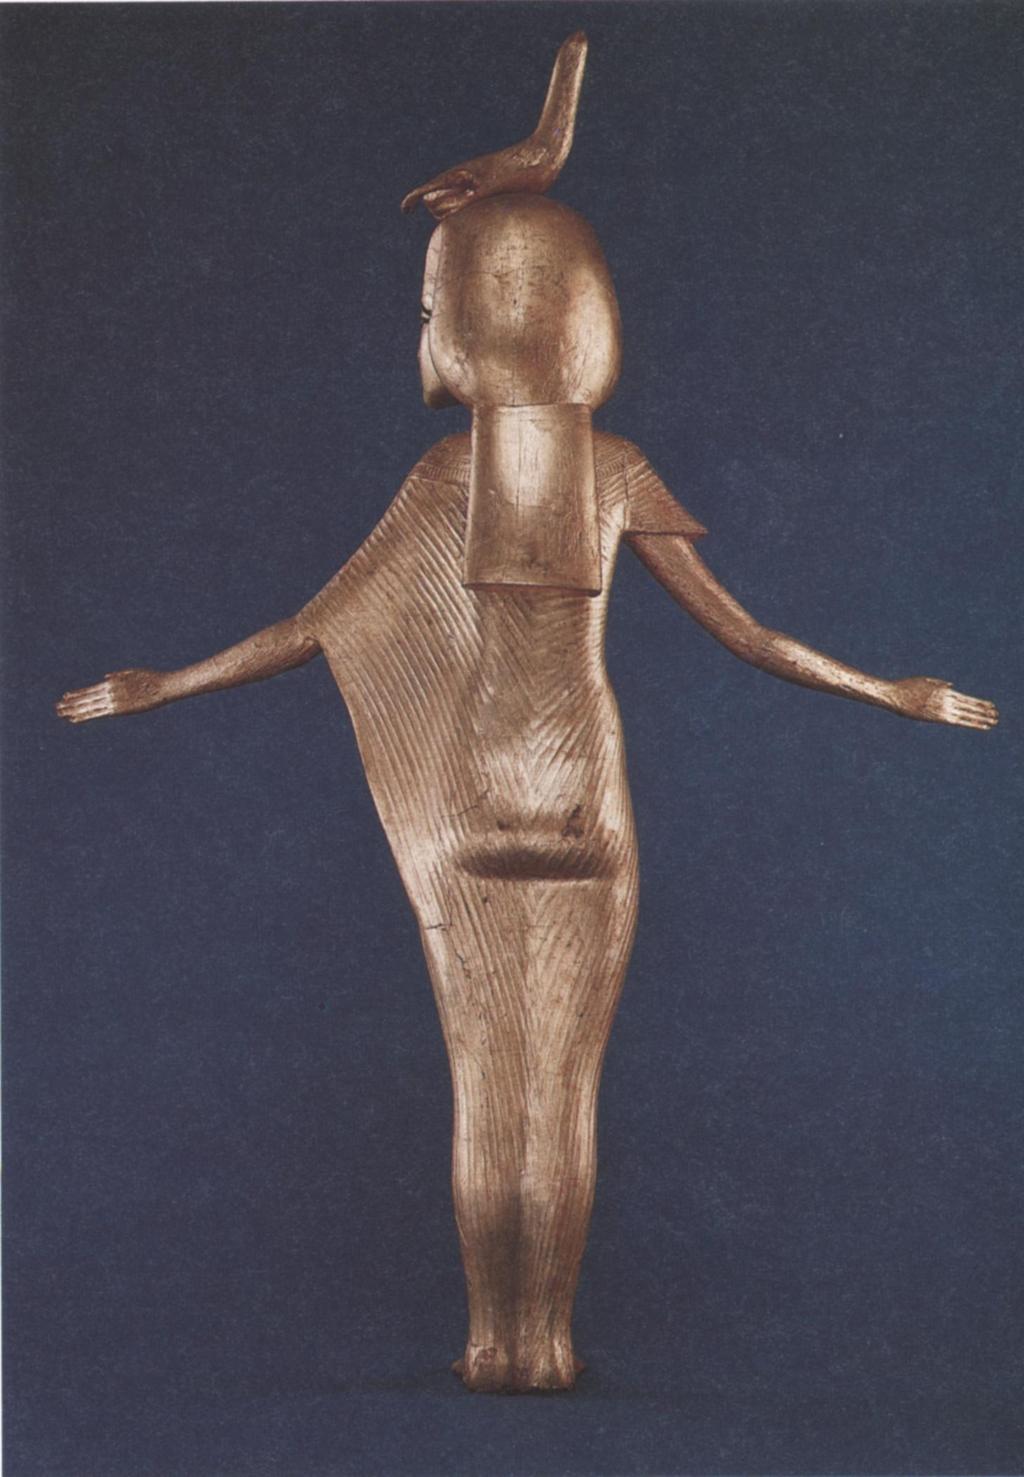 This figure suggests how the naturalism of the preceding Amarna period had infused Egyptian art with special freshness and grace.